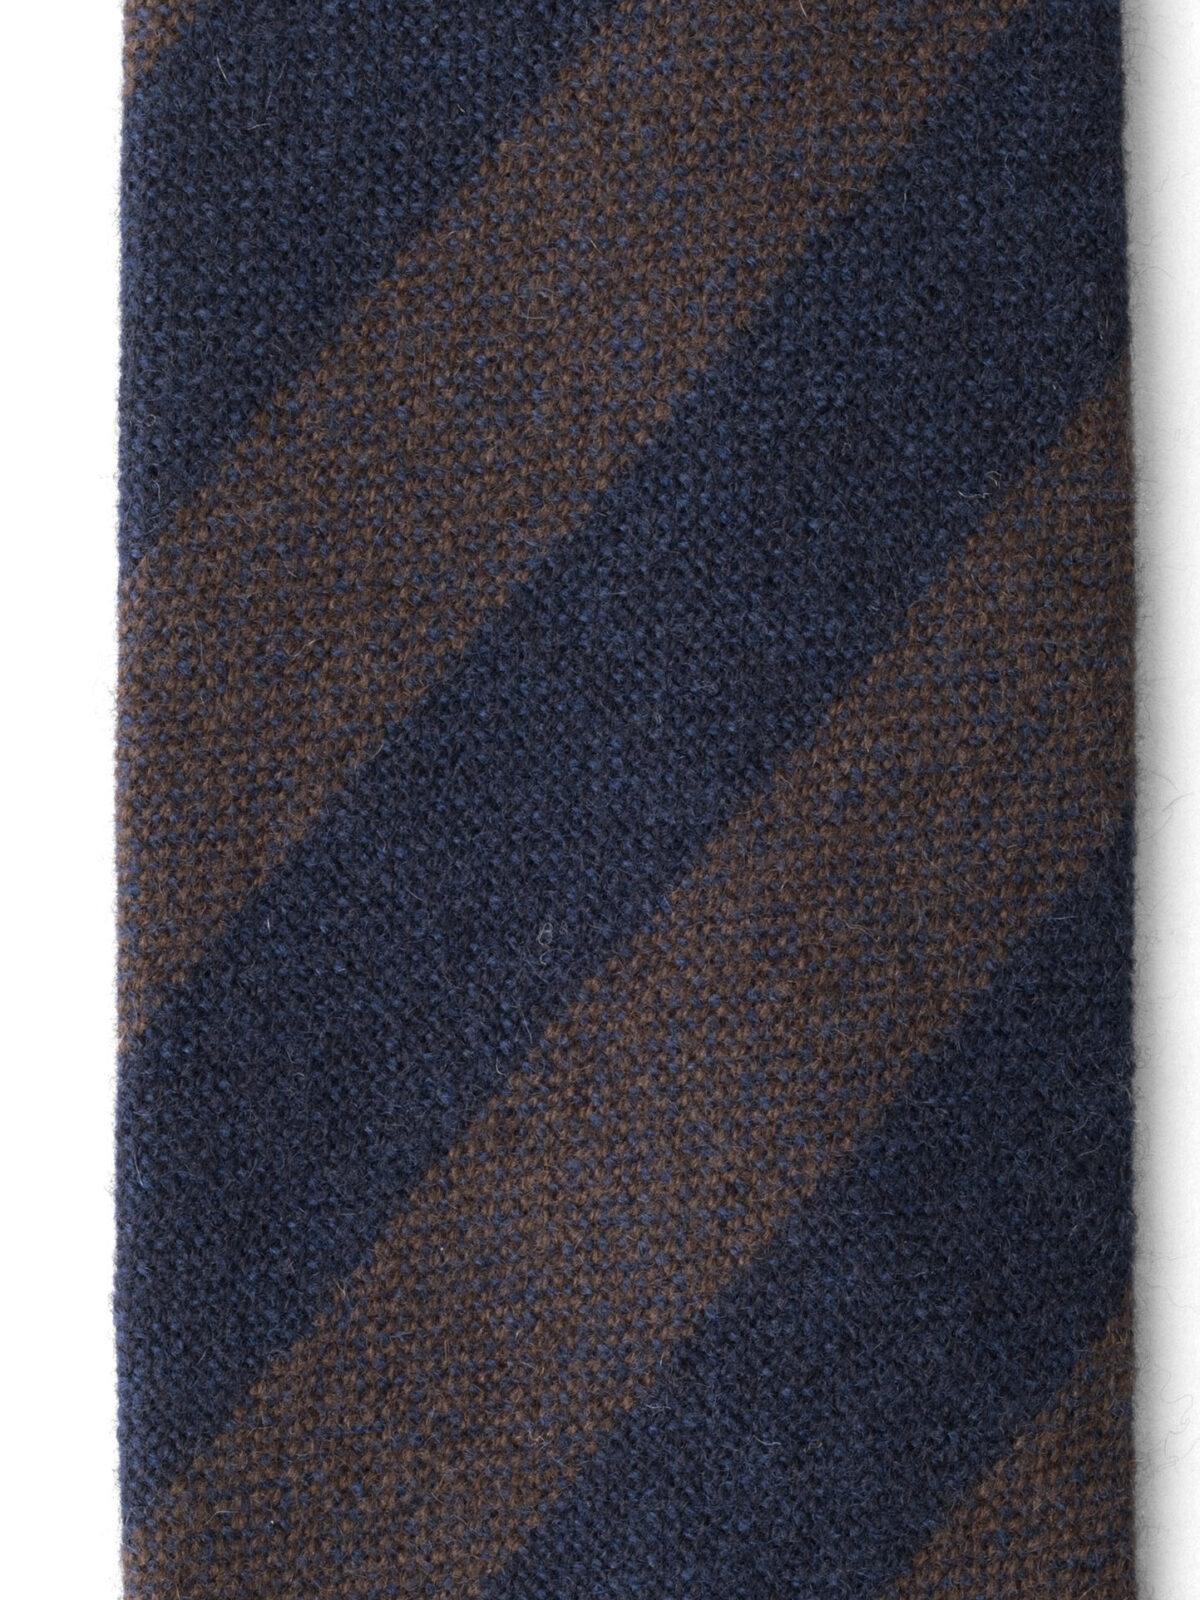 Mocha and Navy Striped Cashmere Tie